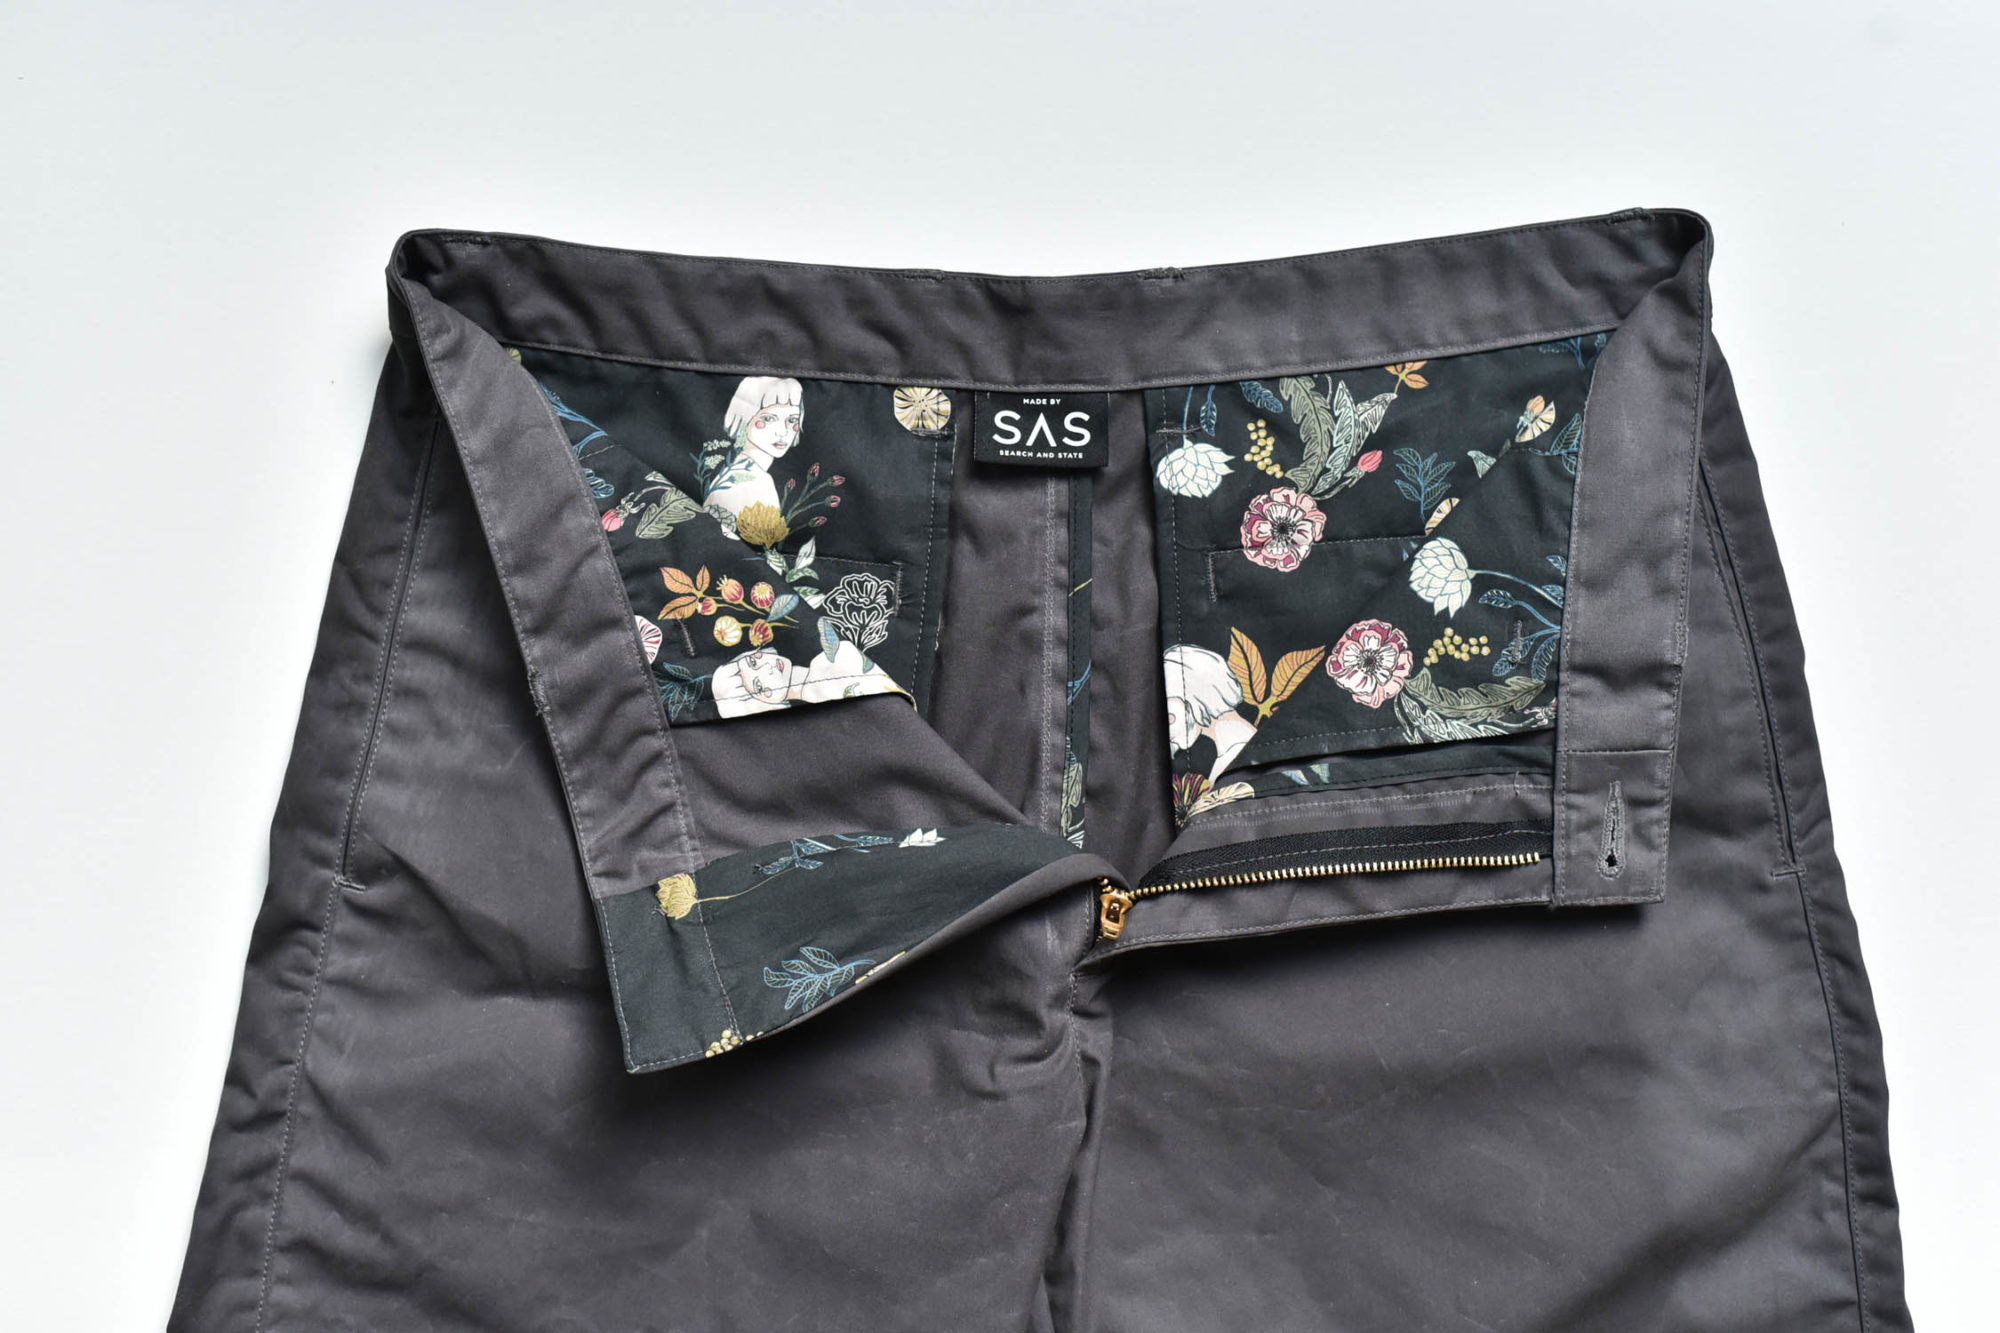 Search and State Field Shorts